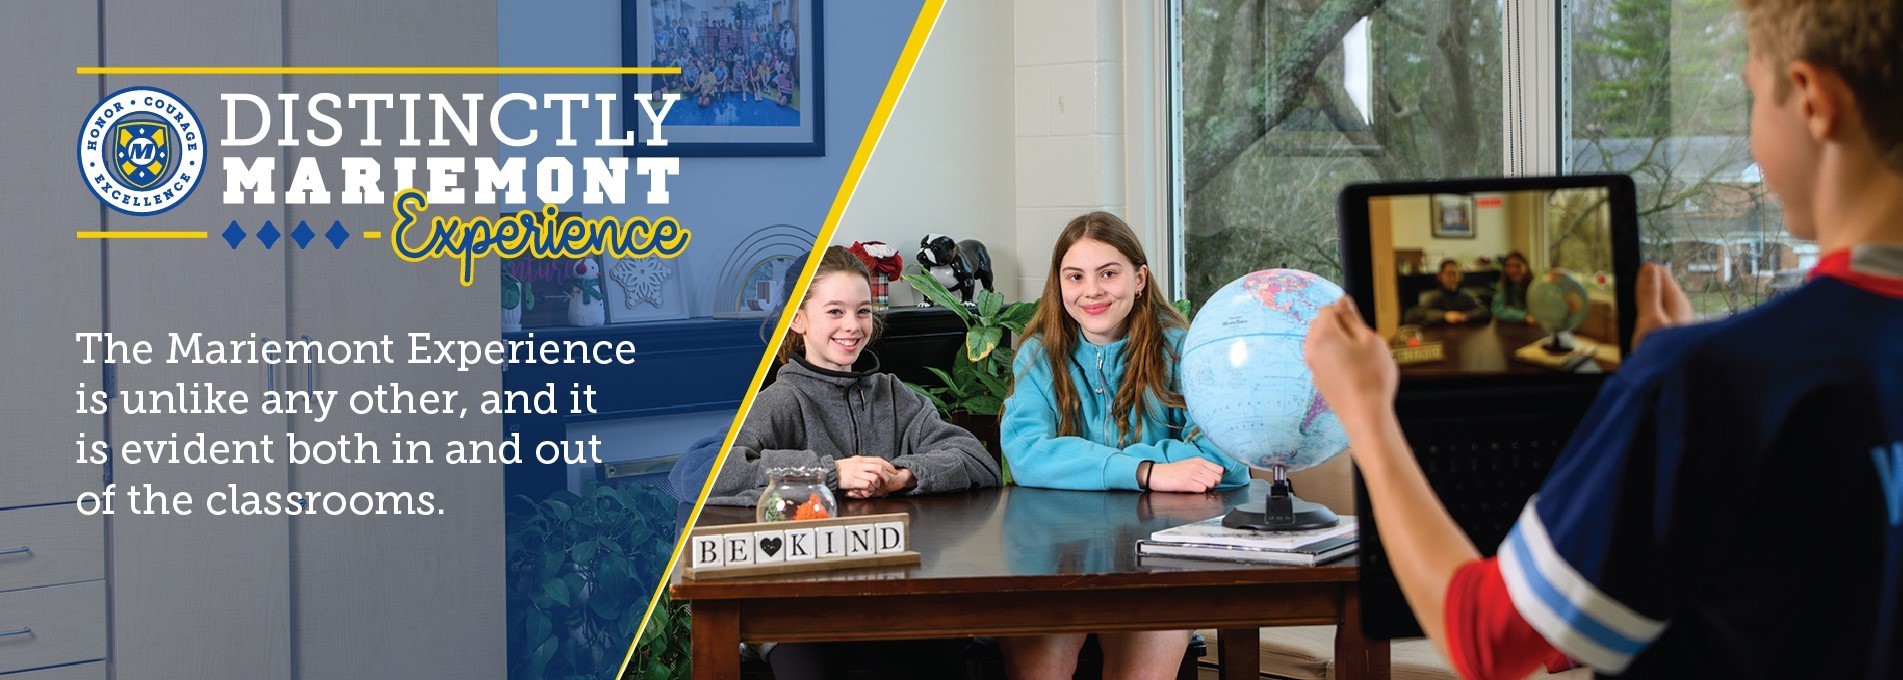 Distinctly Mariemont: Experience - The Mariemont Experience is unlike any other, and it is evident both in and out of the classrooms - students smiling on news broadcast